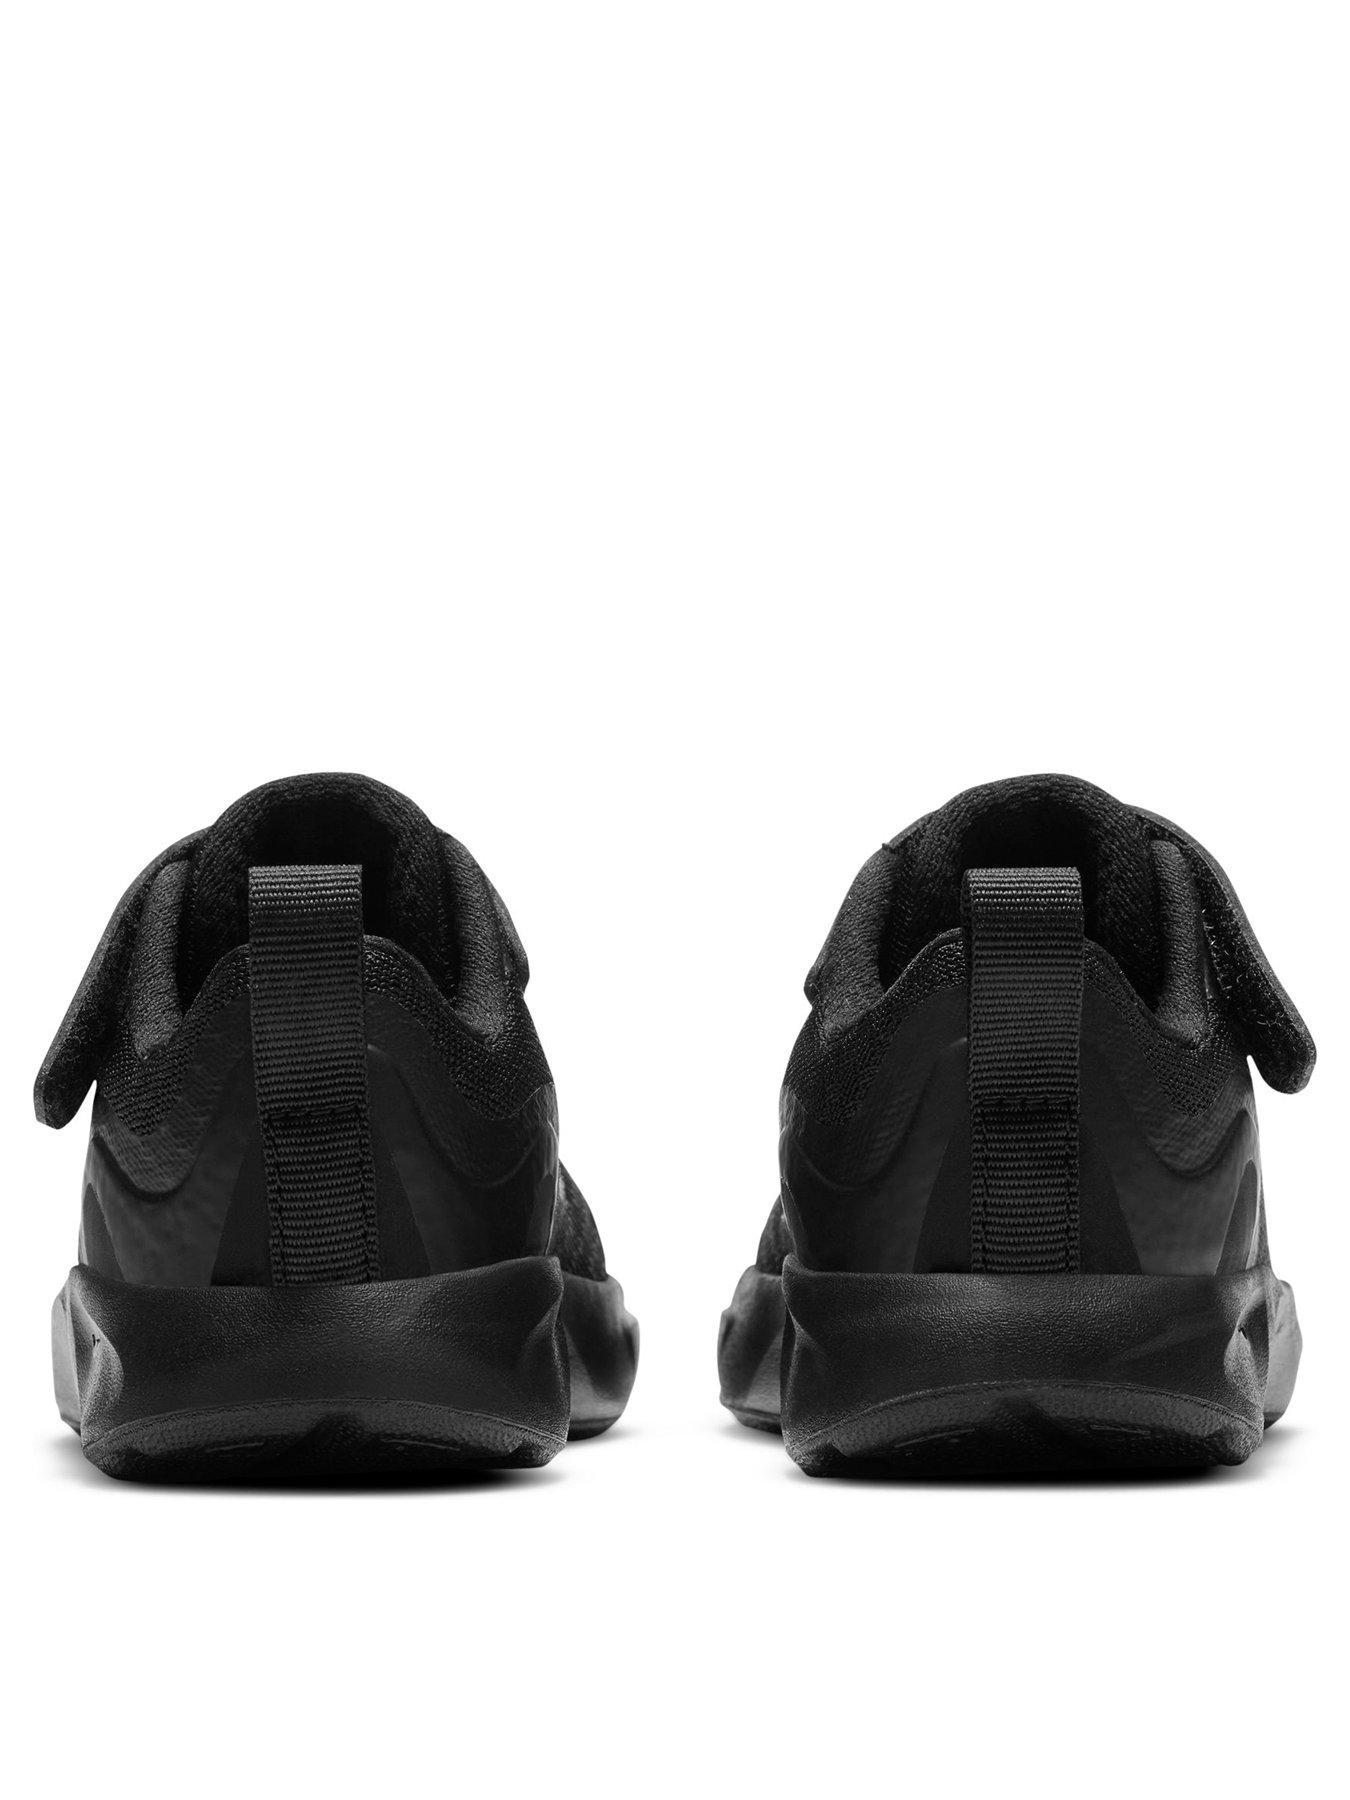 Nike Wearallday Infant Trainers - Black | very.co.uk